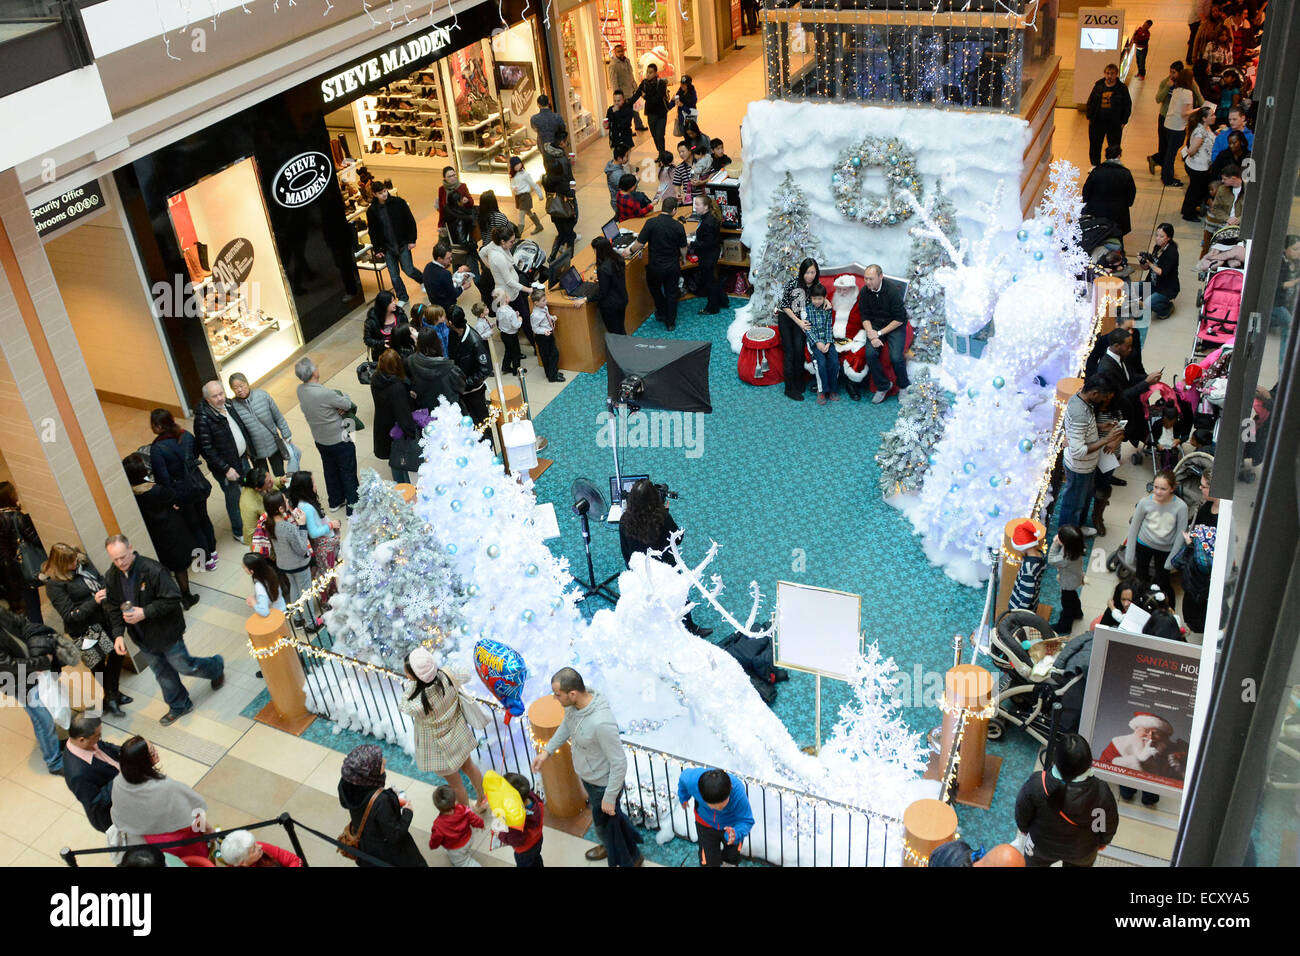 Toronto, Canada. 21st December 2014. Parents and children lining up for Santa Photo at Fairview Mall in Toronto. Stock Photo